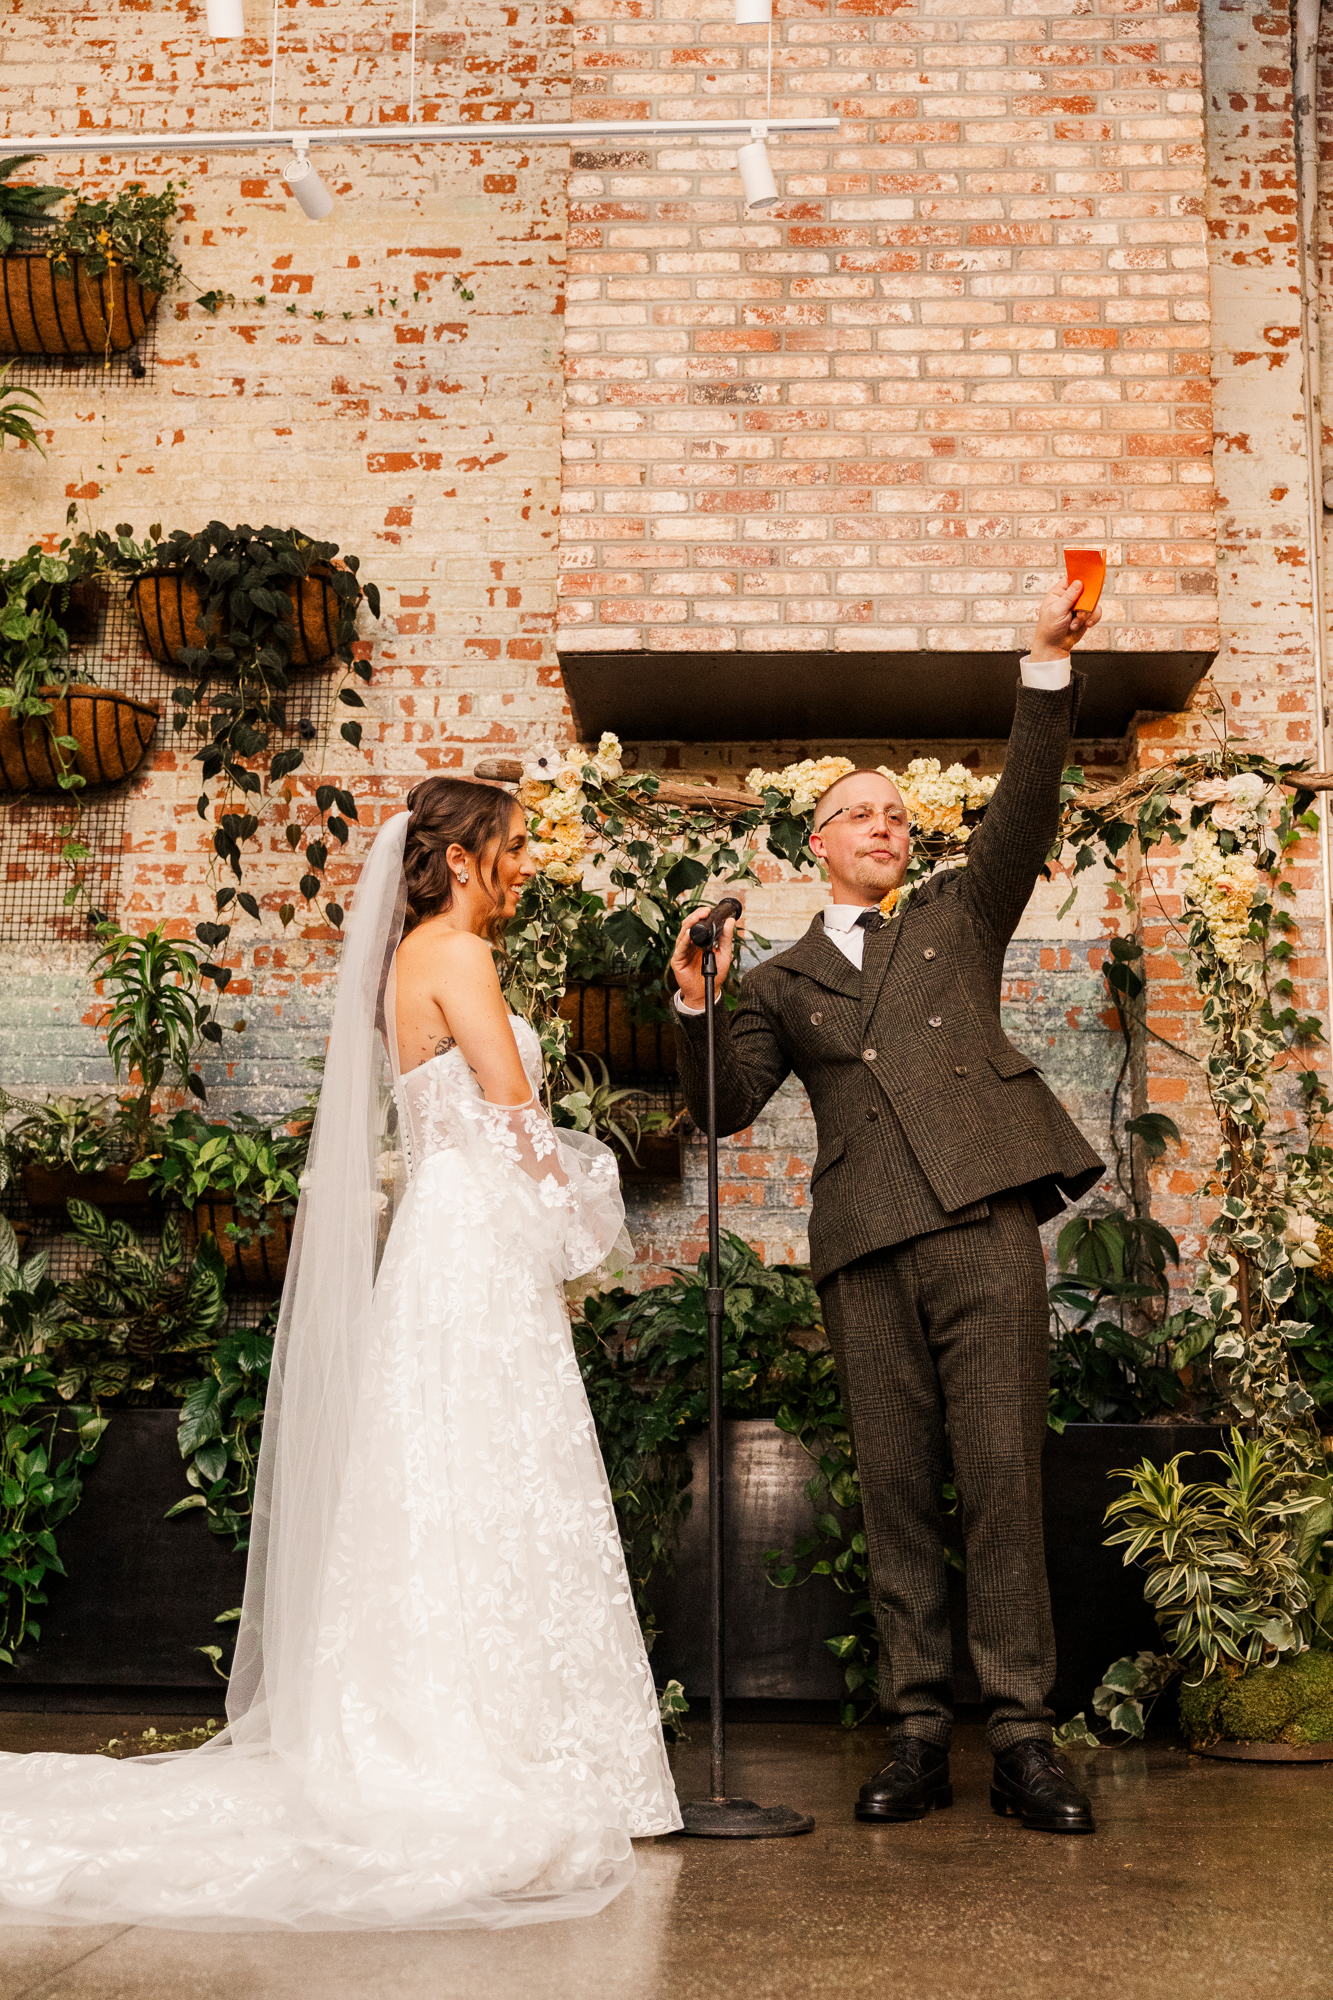 Special Wedding Photography at Brooklyn Winery